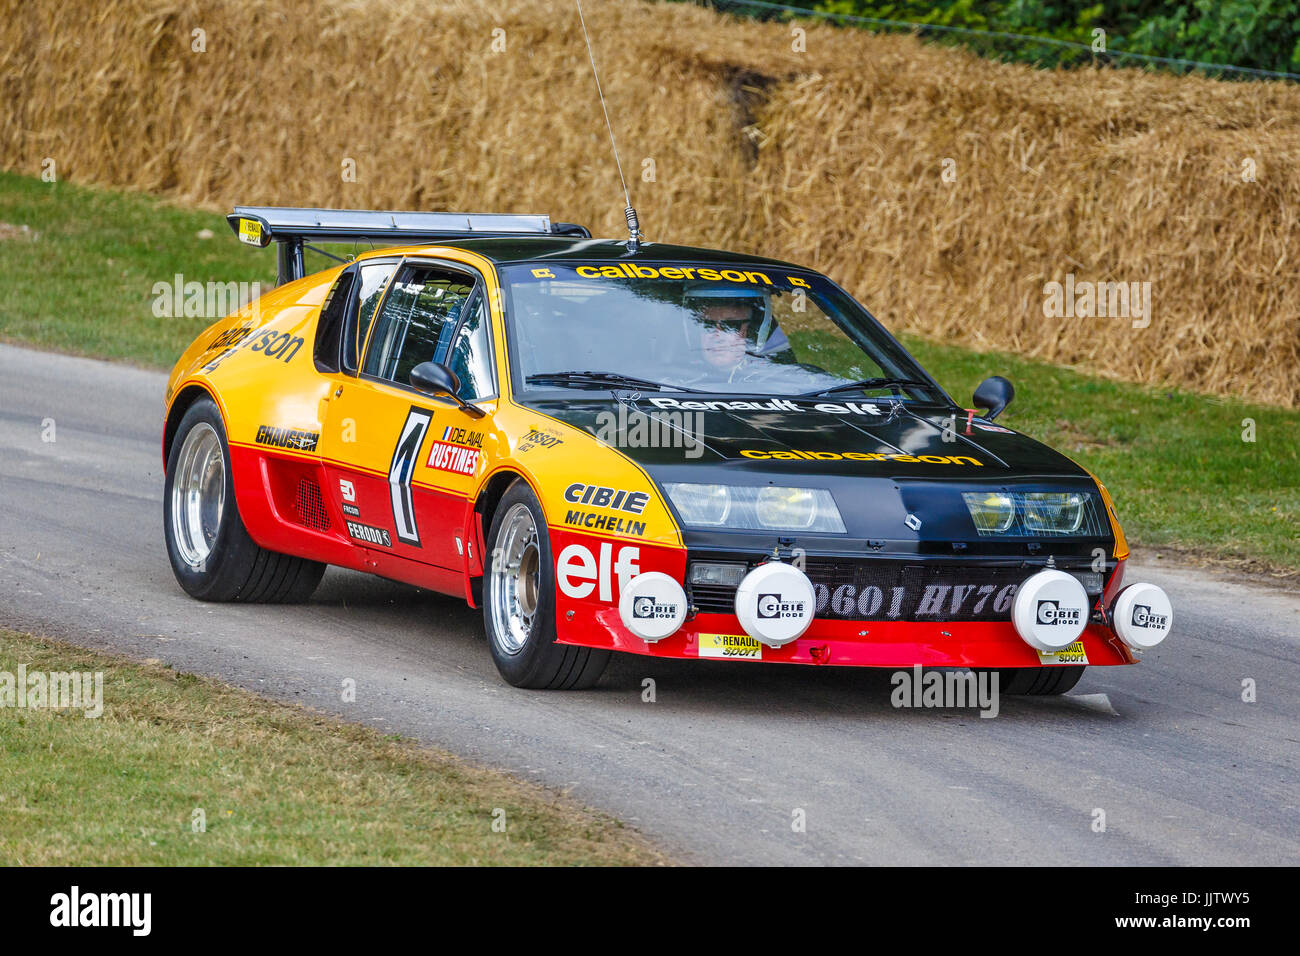 1977 Renault Alpine A310 rally car at the 2017 Goodwood Festival of Speed, Sussex, UK. Stock Photo